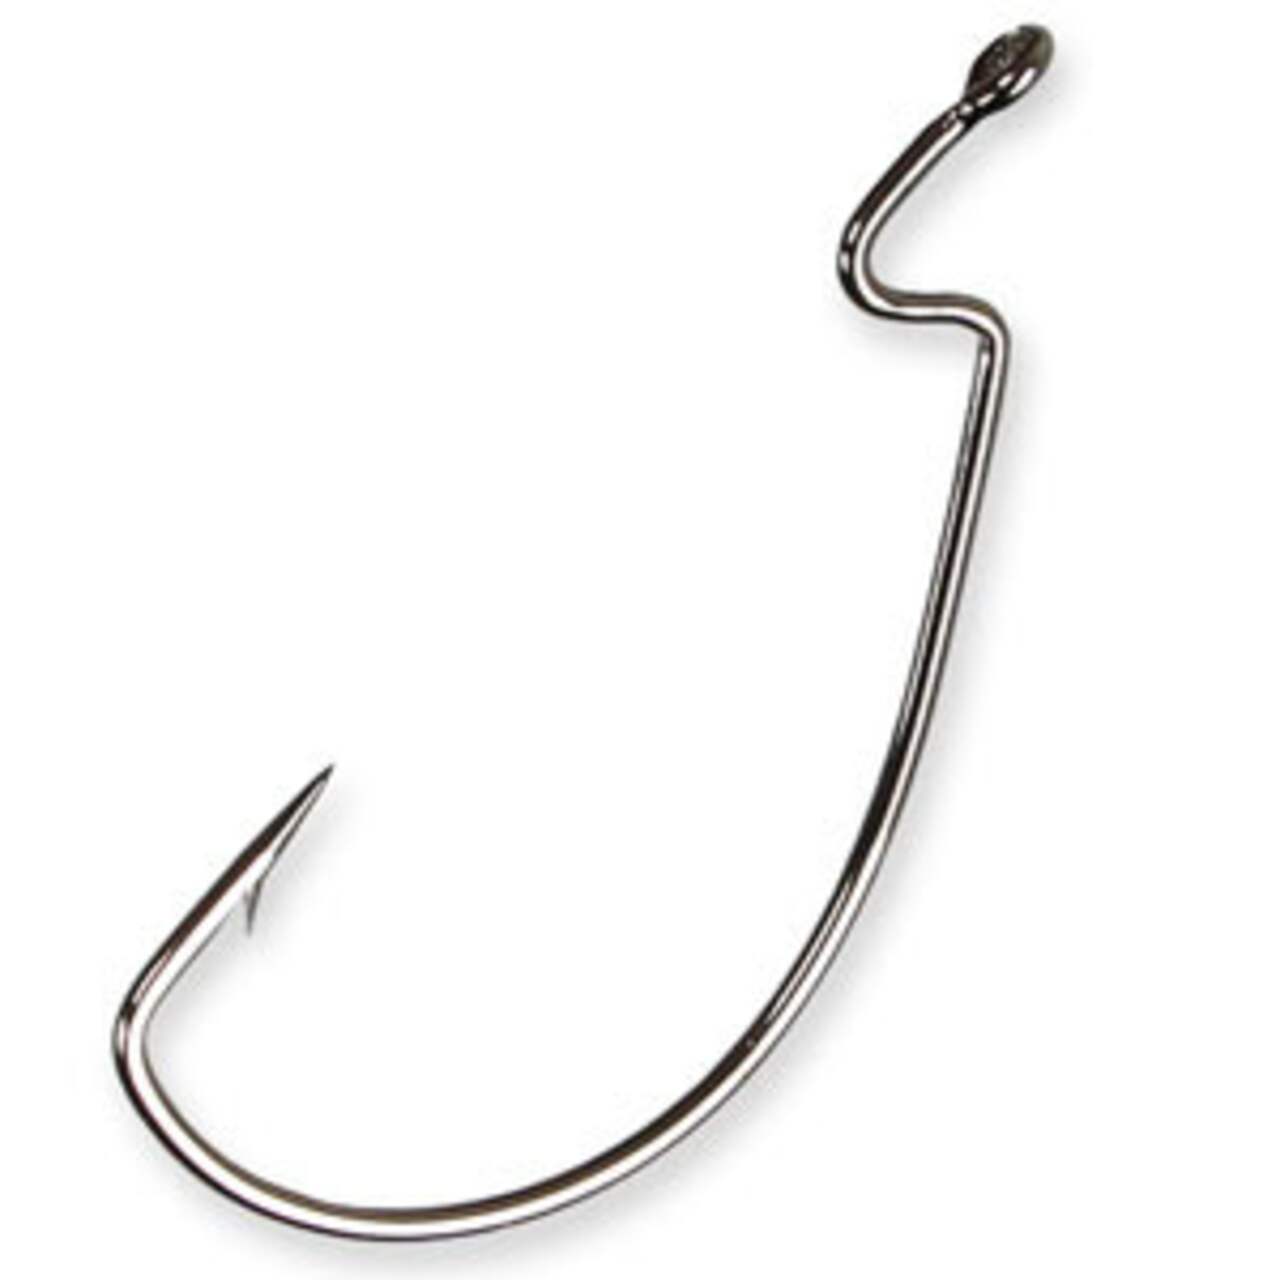 https://media-www.canadiantire.ca/product/playing/fishing/fishing-lures/0780612/ultra-lock-worm-hook-black-2b9f8f9d-2f23-457a-bafb-ee1e35def335.png?imdensity=1&imwidth=640&impolicy=mZoom